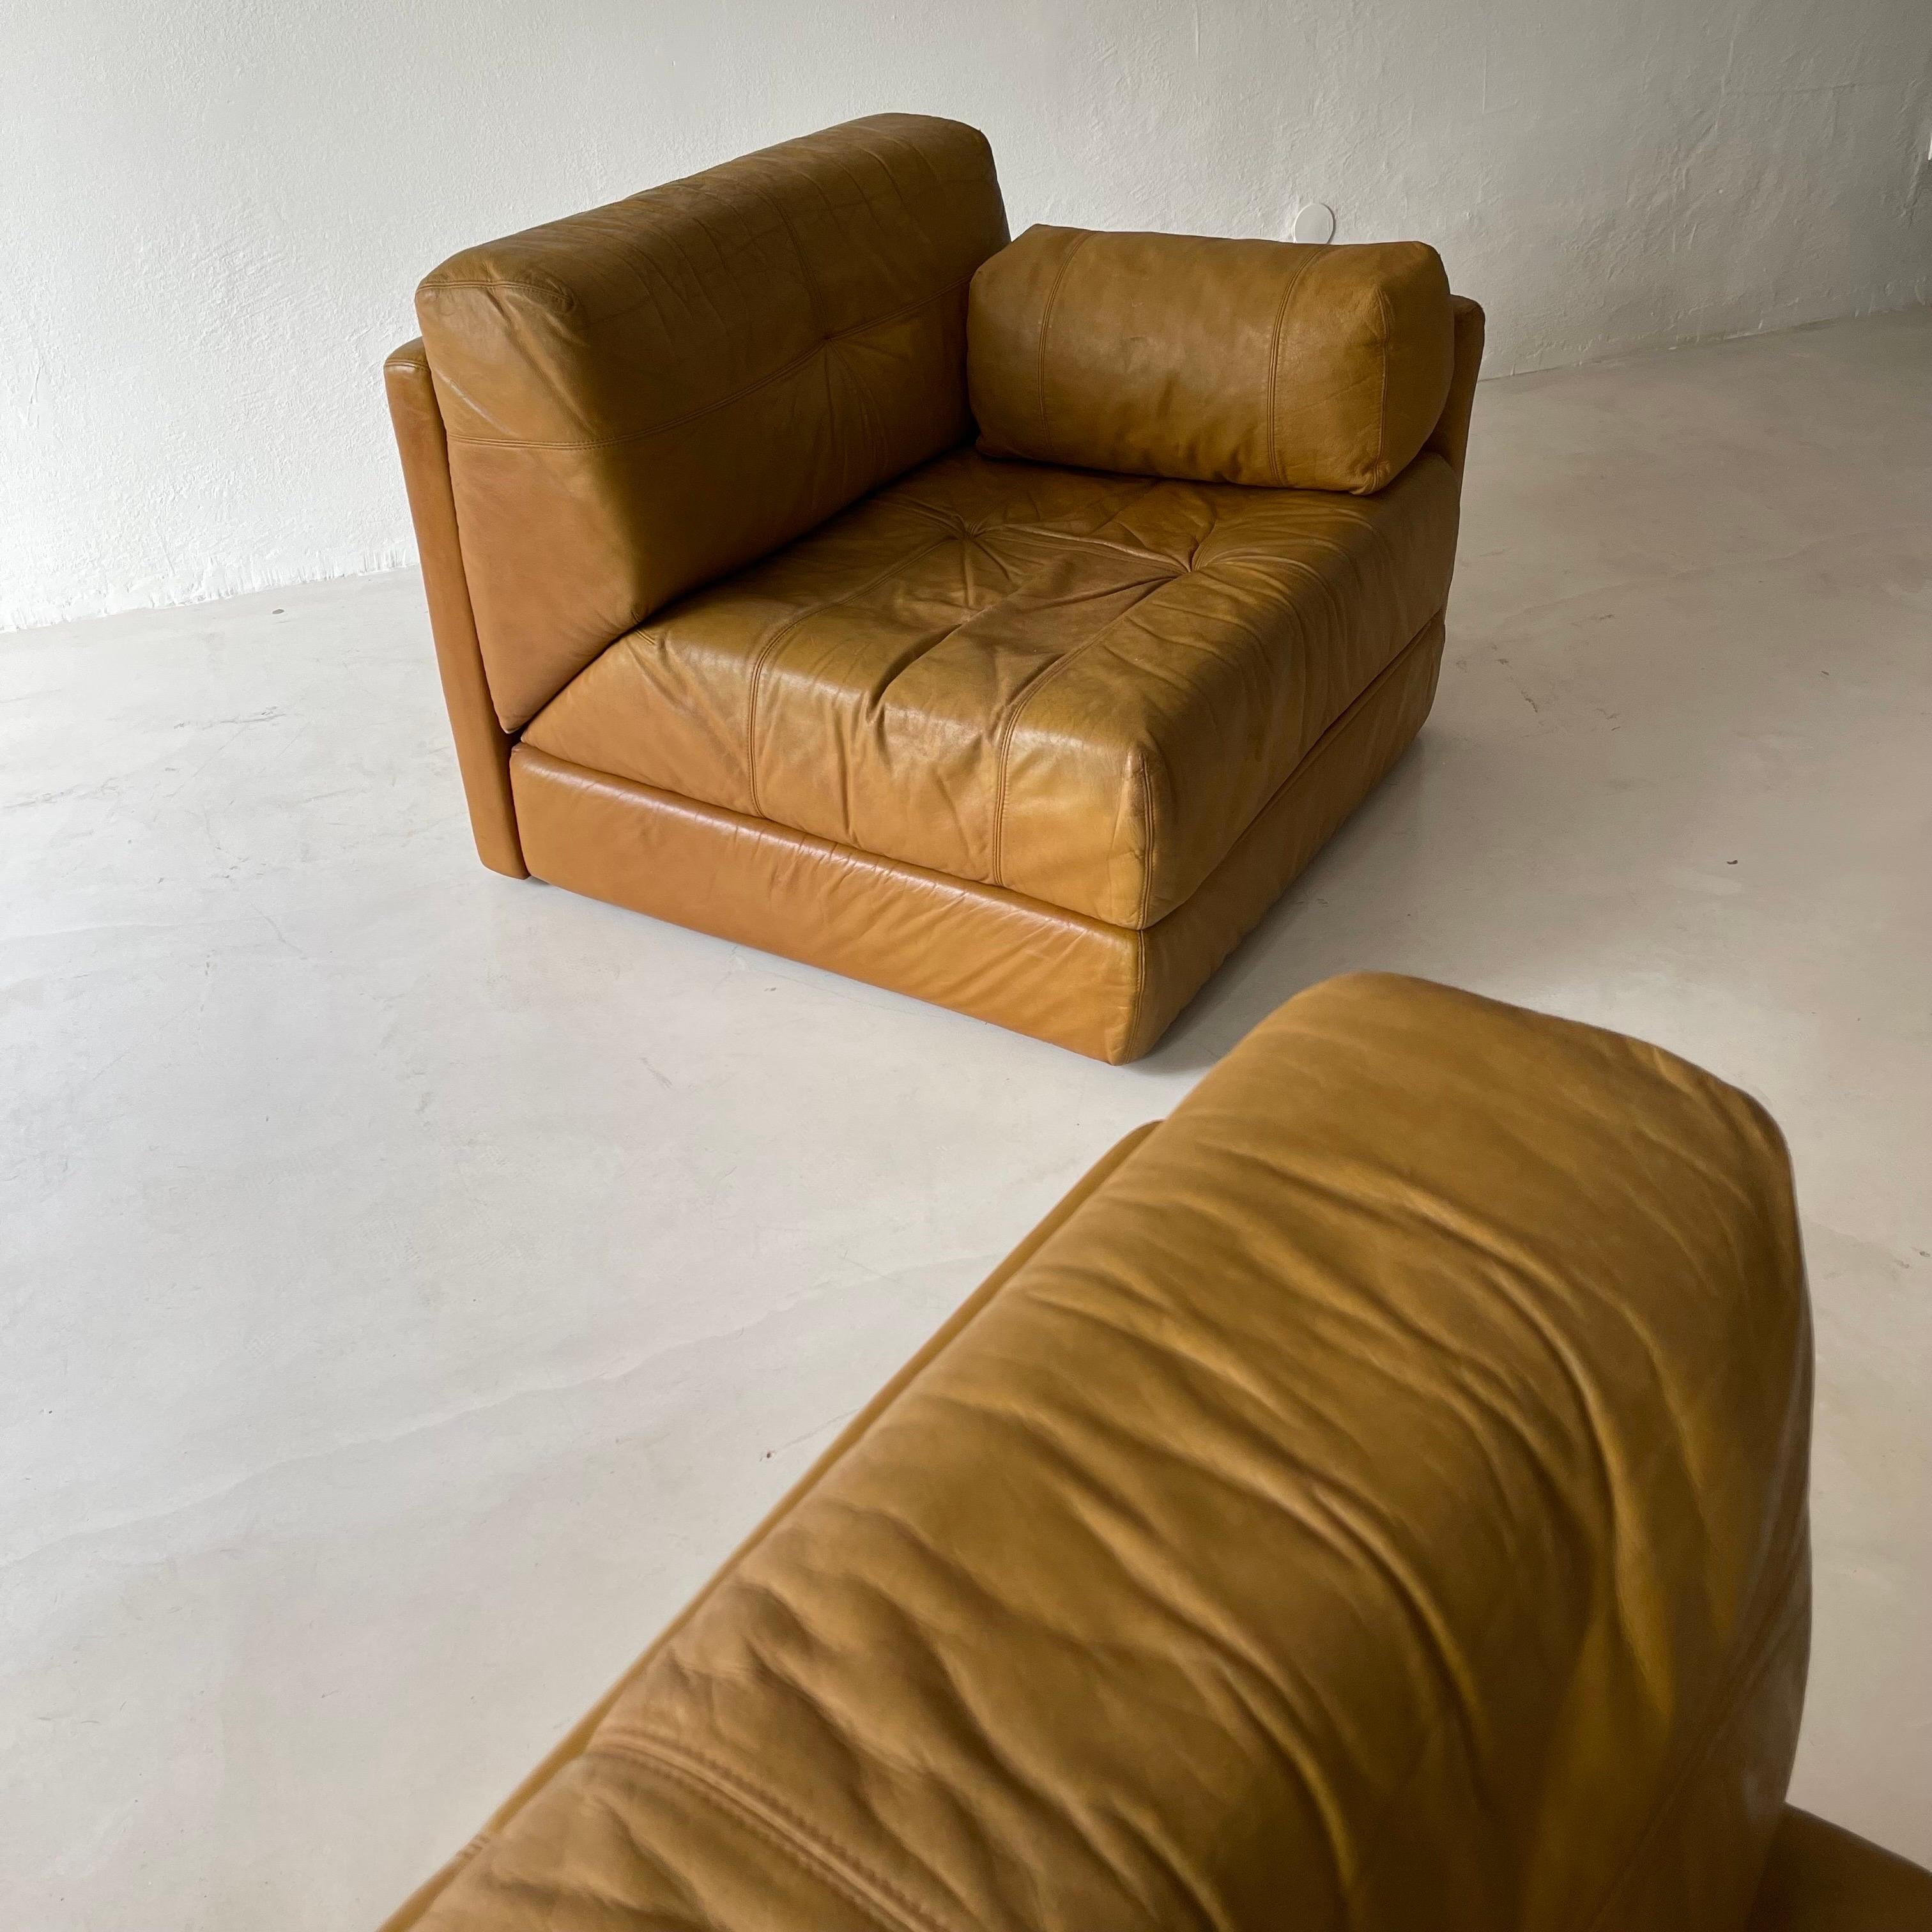 Wittmann Atrium Cognac Leather Daybed Sofa, 1970s For Sale 12